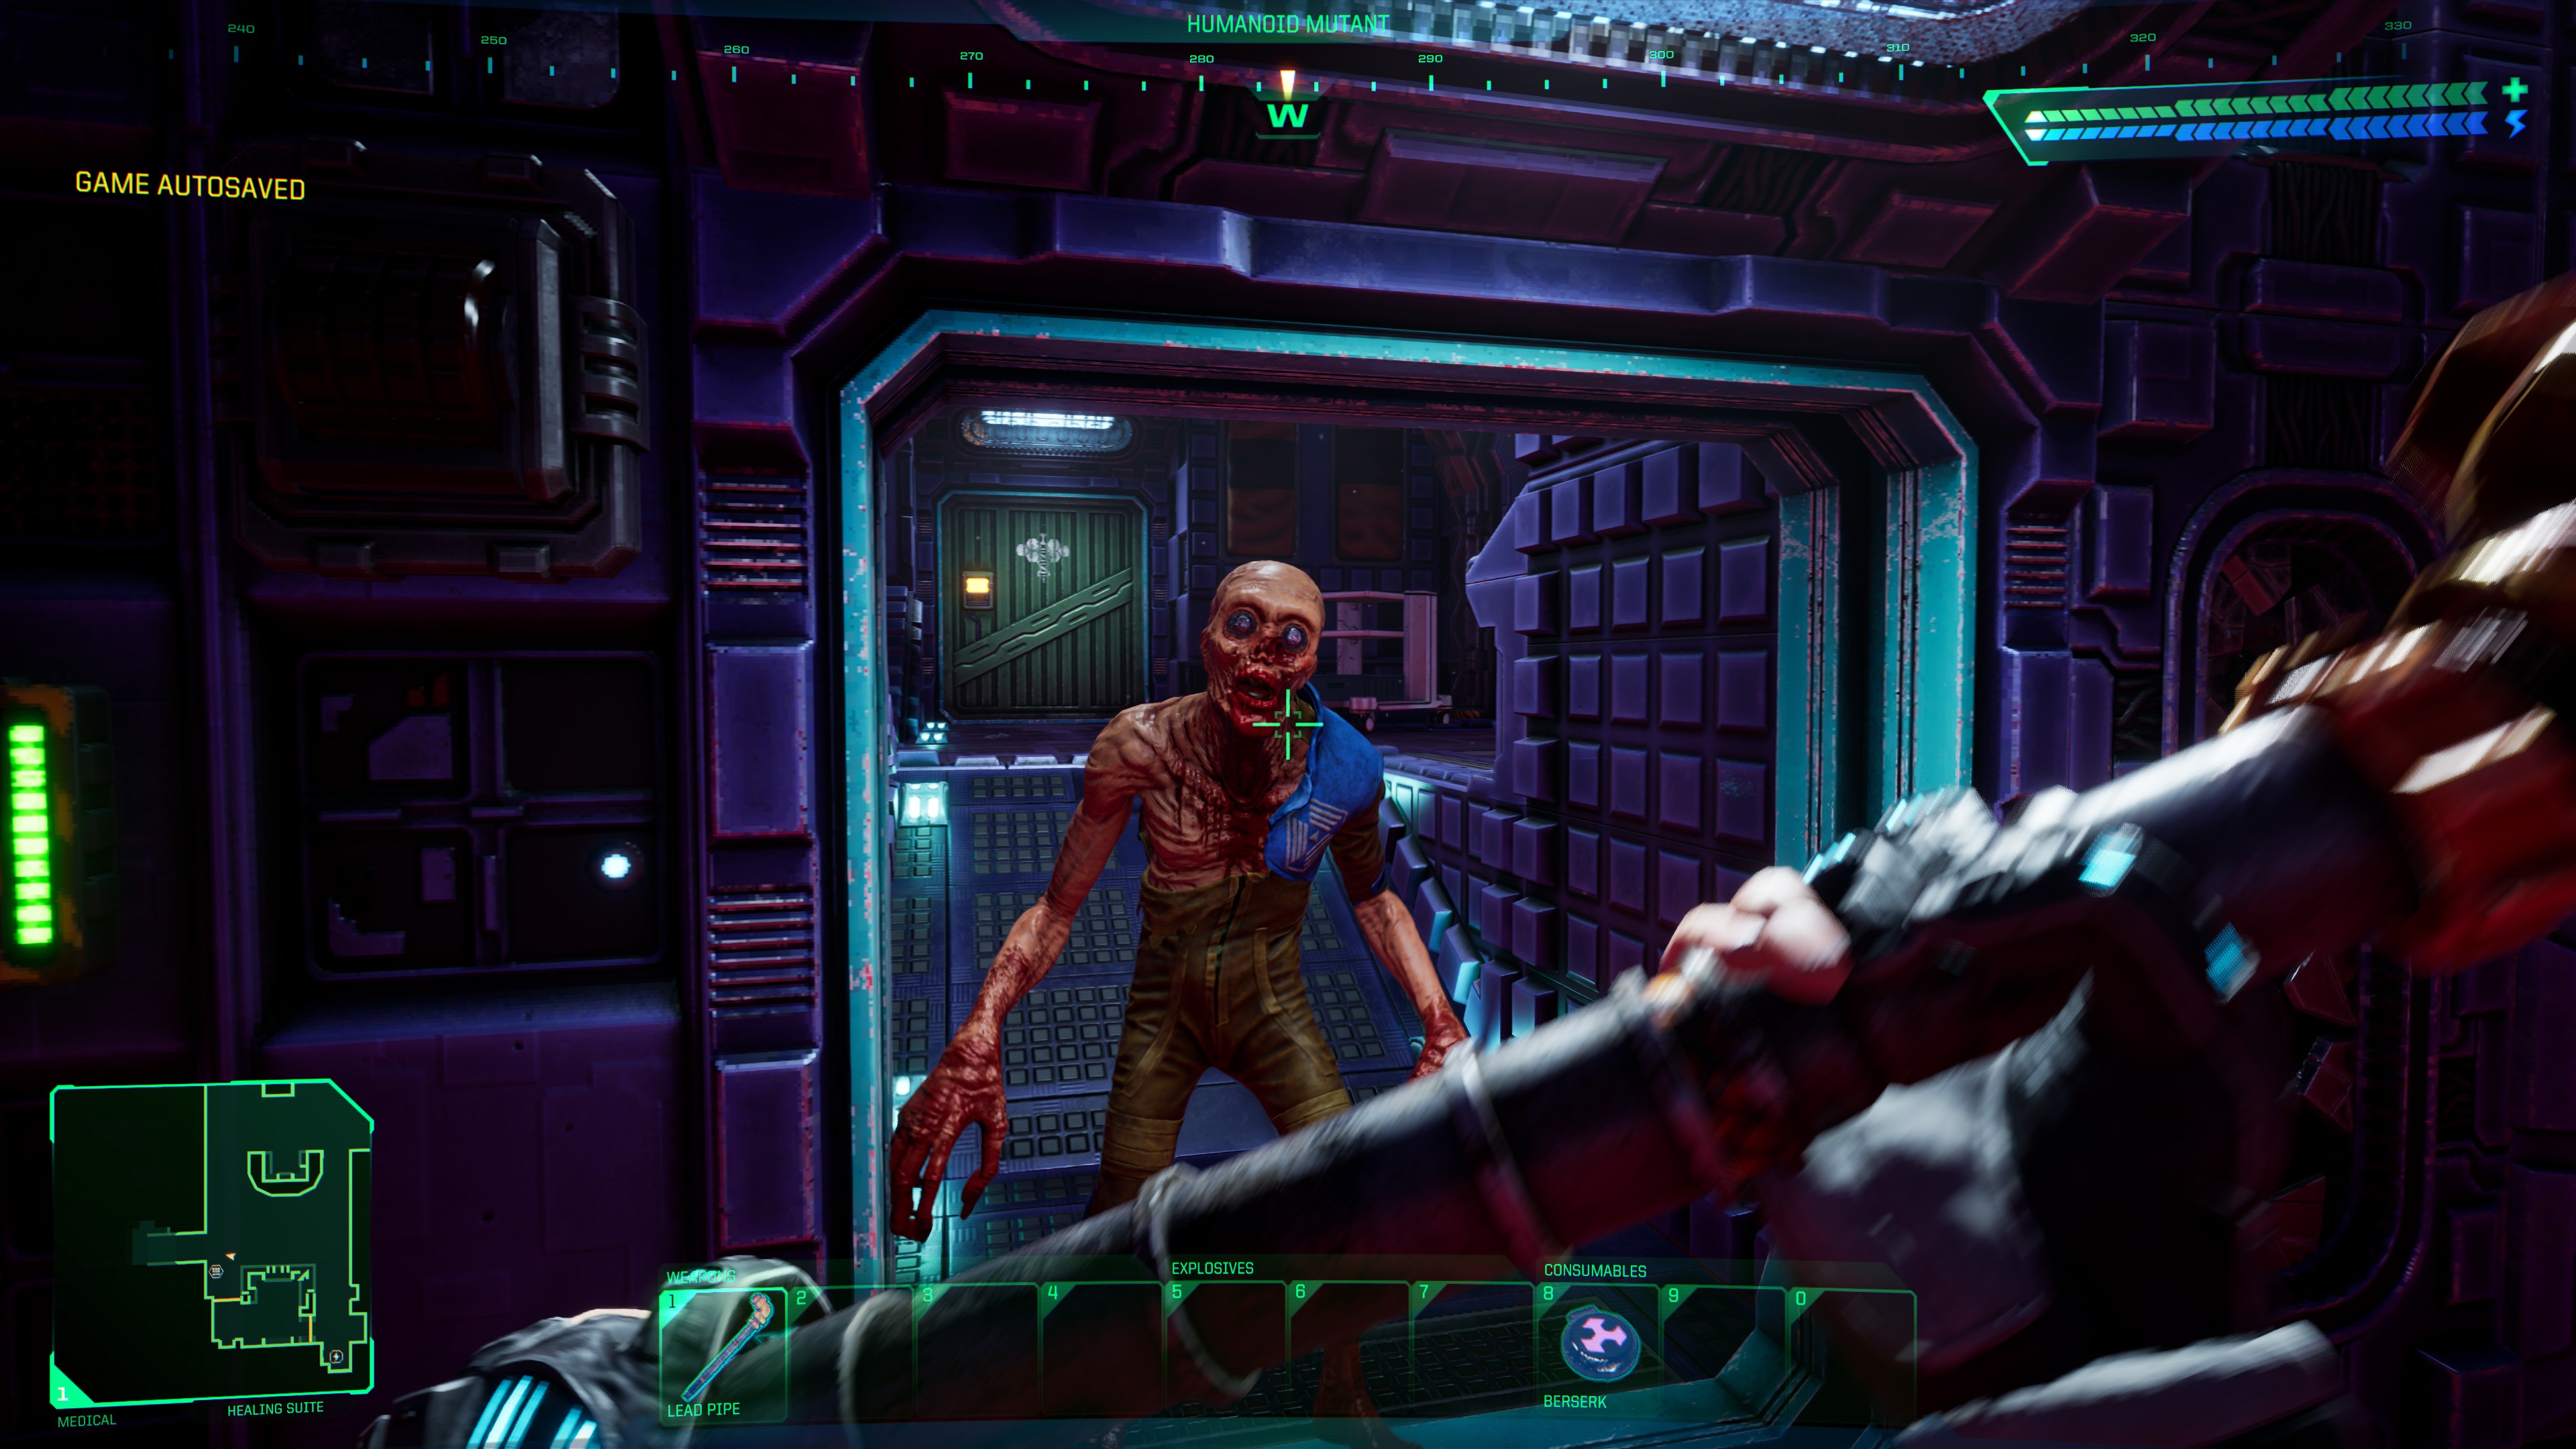 The player attacks a mutant in the System Shock remake.